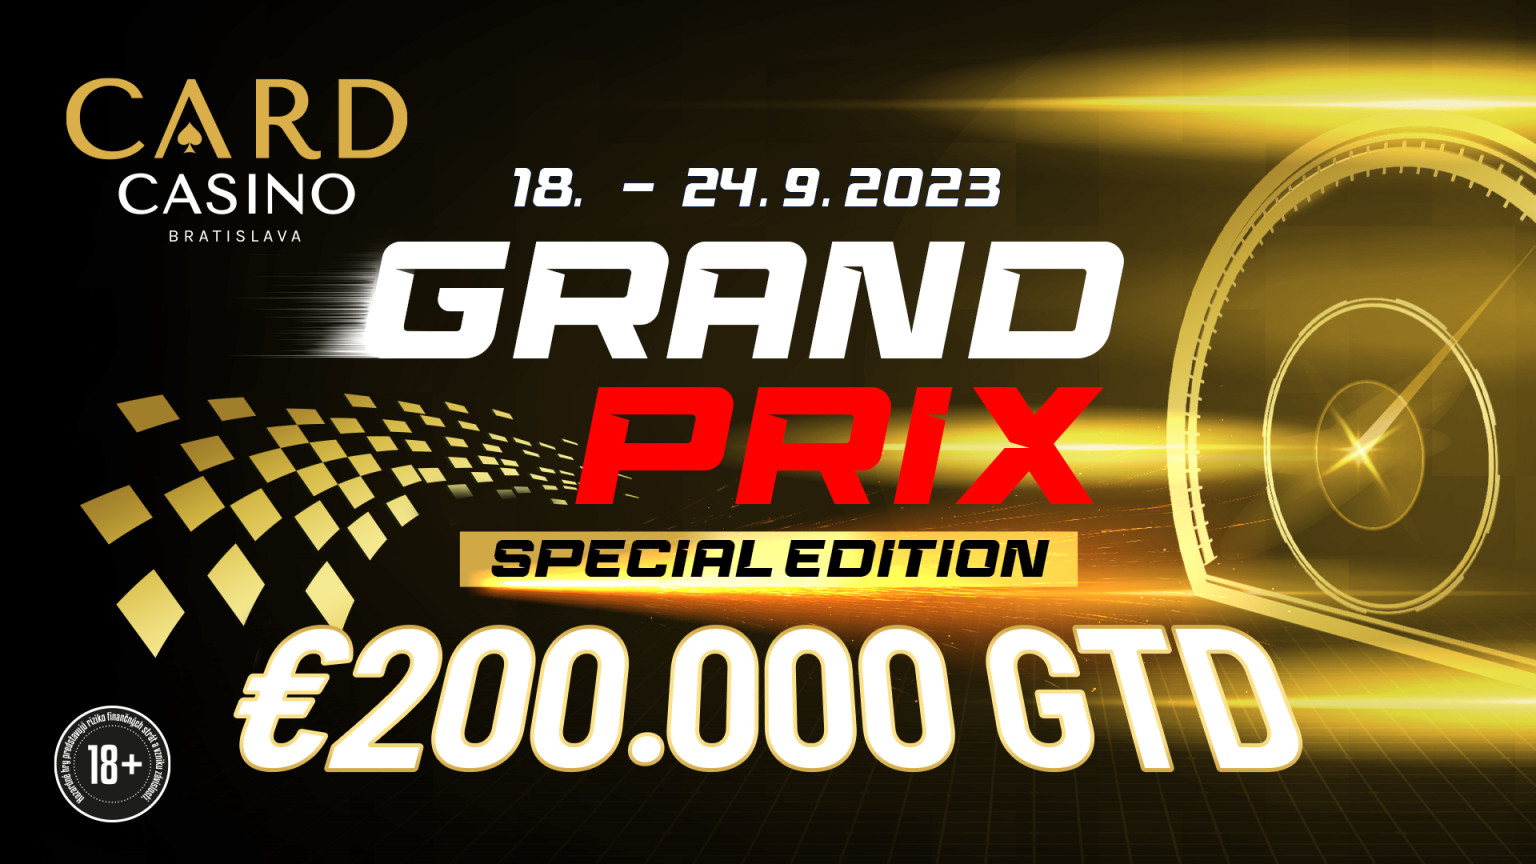 Grand Prix for the second time! Get ready for the Special Edition with €200,000 GTD